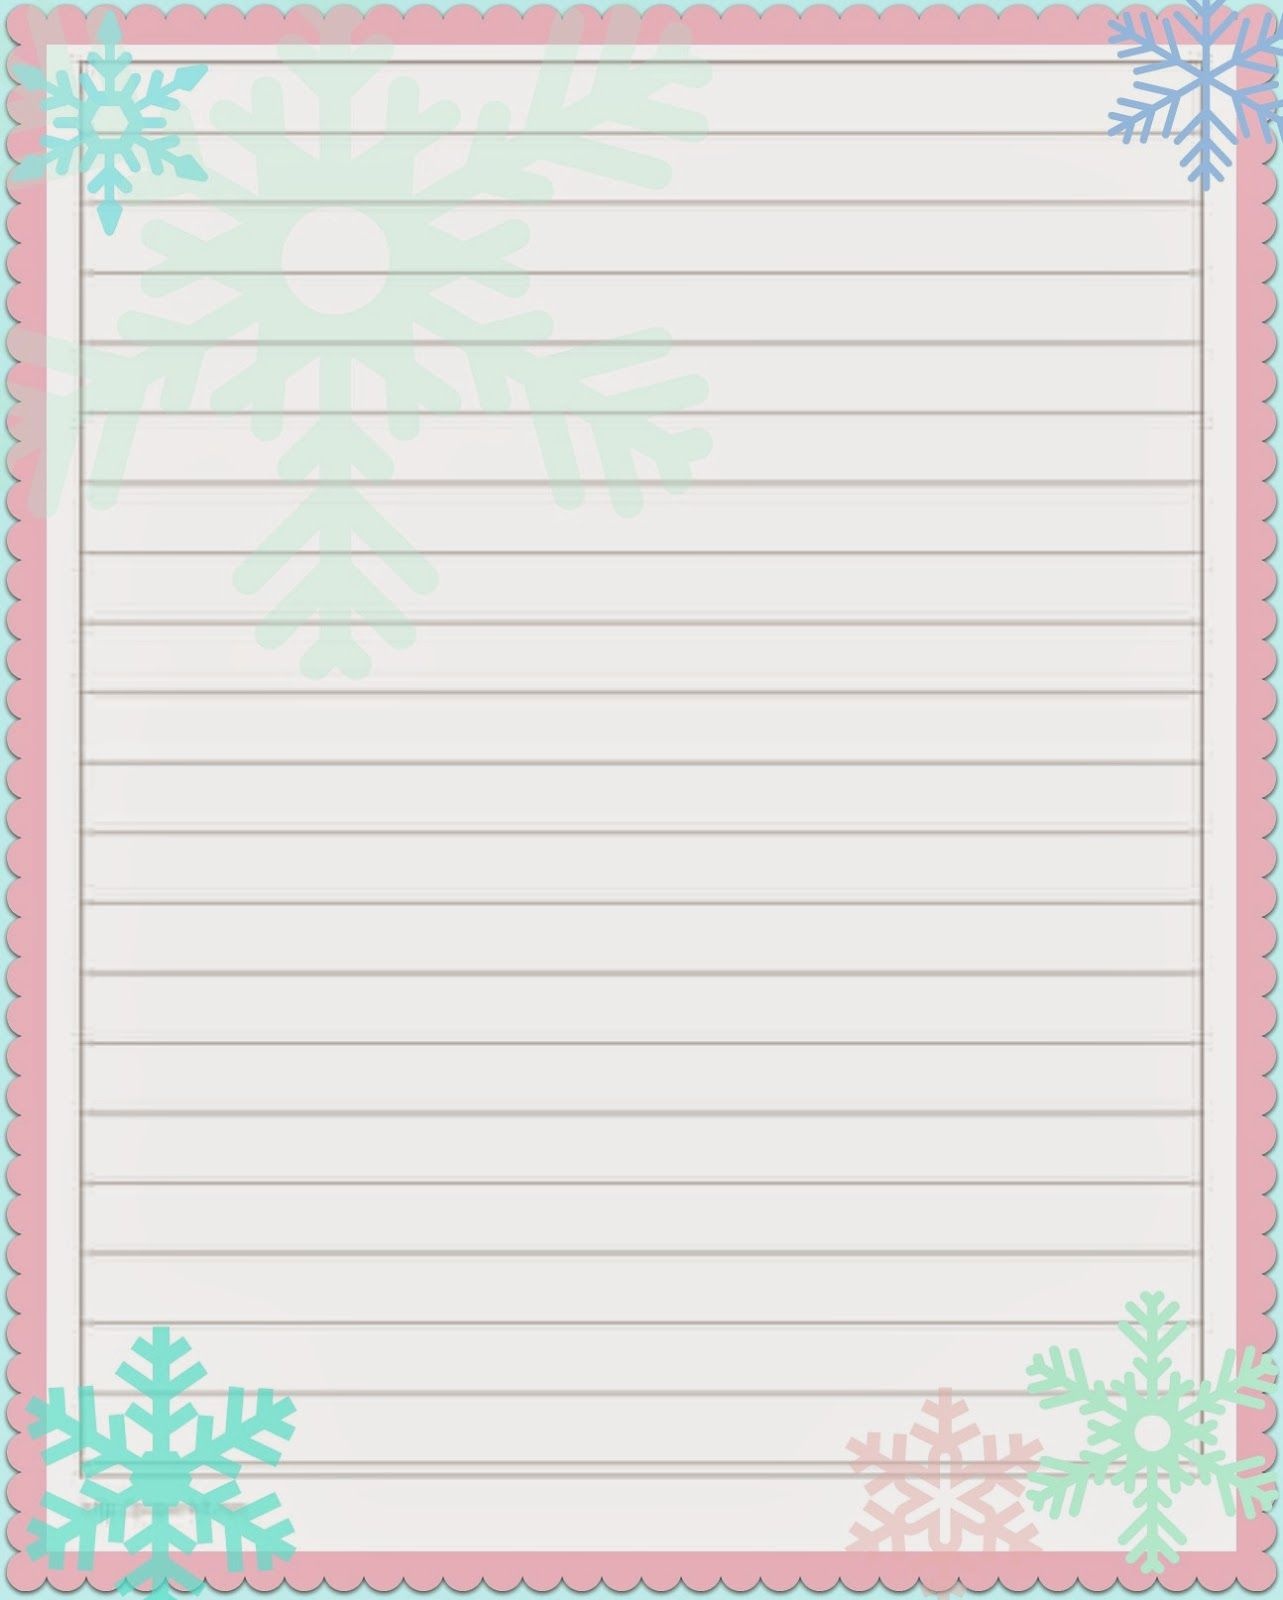 Lined Holiday Printable Paper 5X8 | Best Photos Of Cute Printable - Free Printable Christmas Writing Paper With Lines